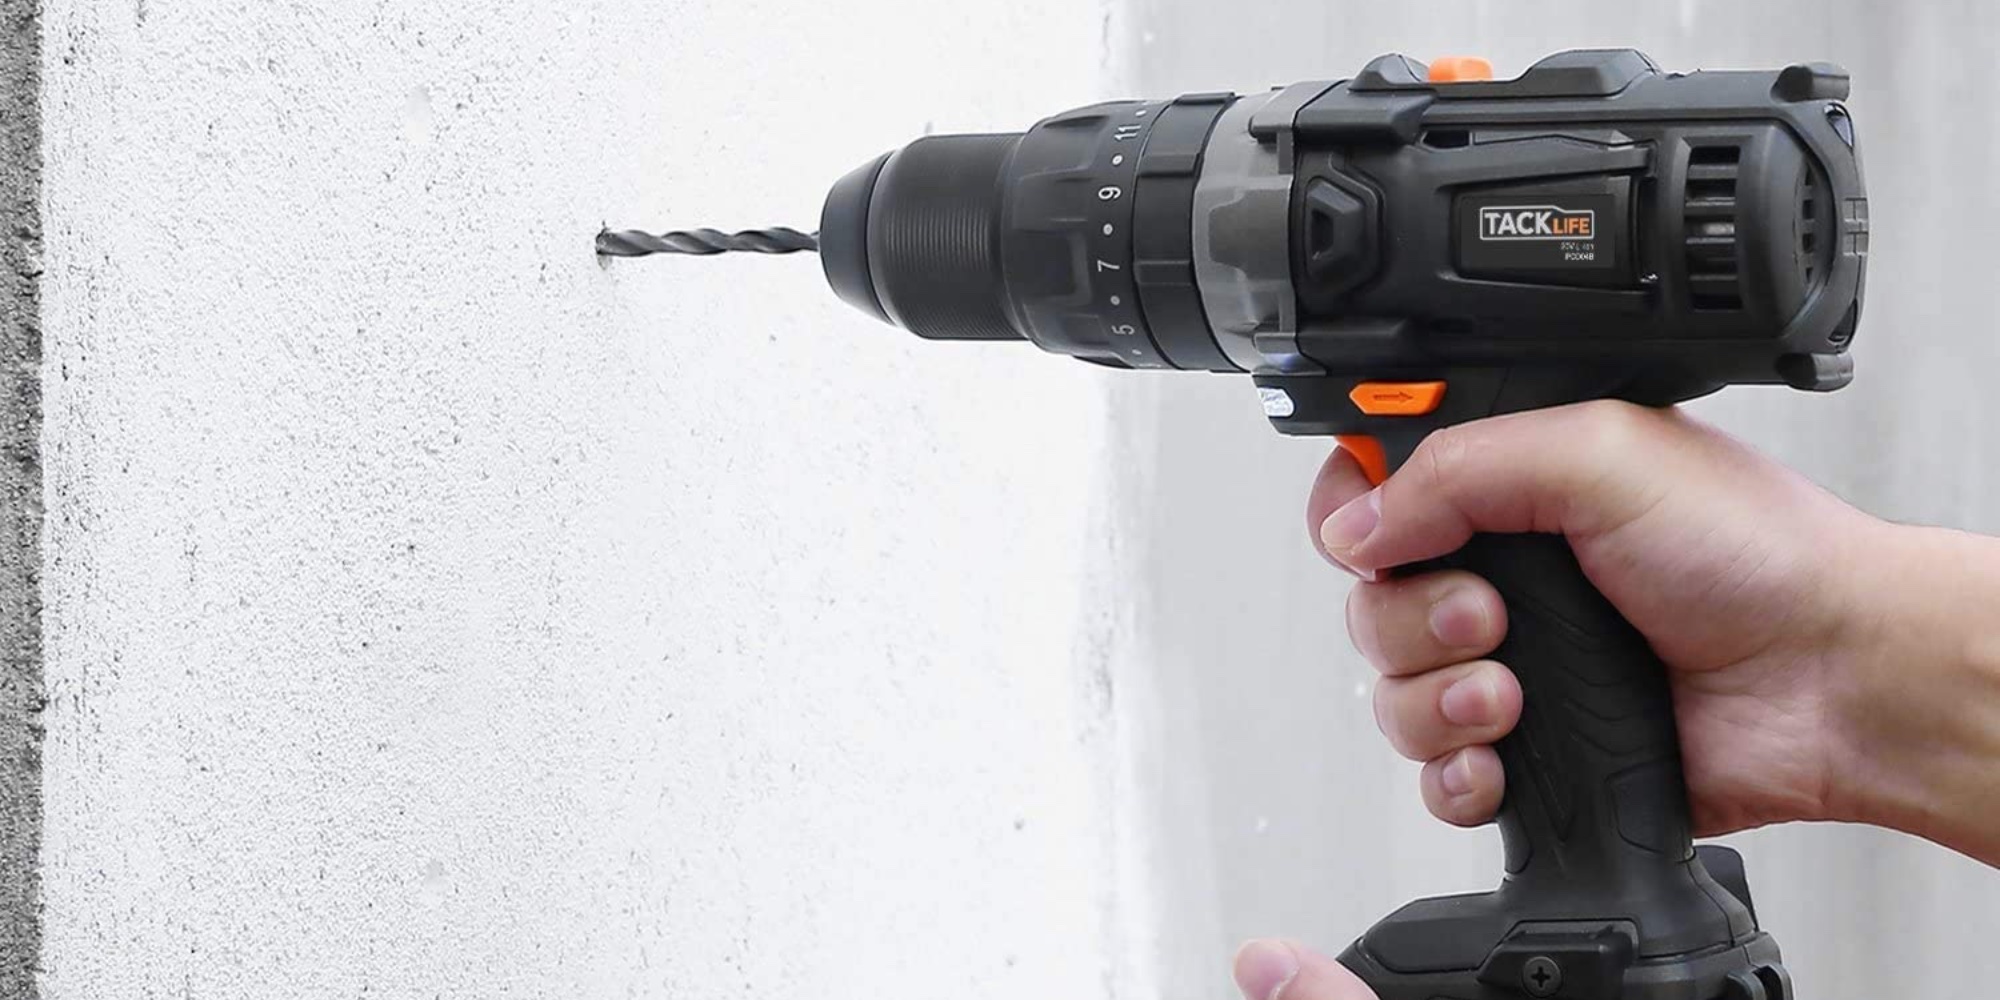 https://9to5toys.com/wp-content/uploads/sites/5/2021/03/TACKLIFE-20V-Cordless-Drill-.jpg